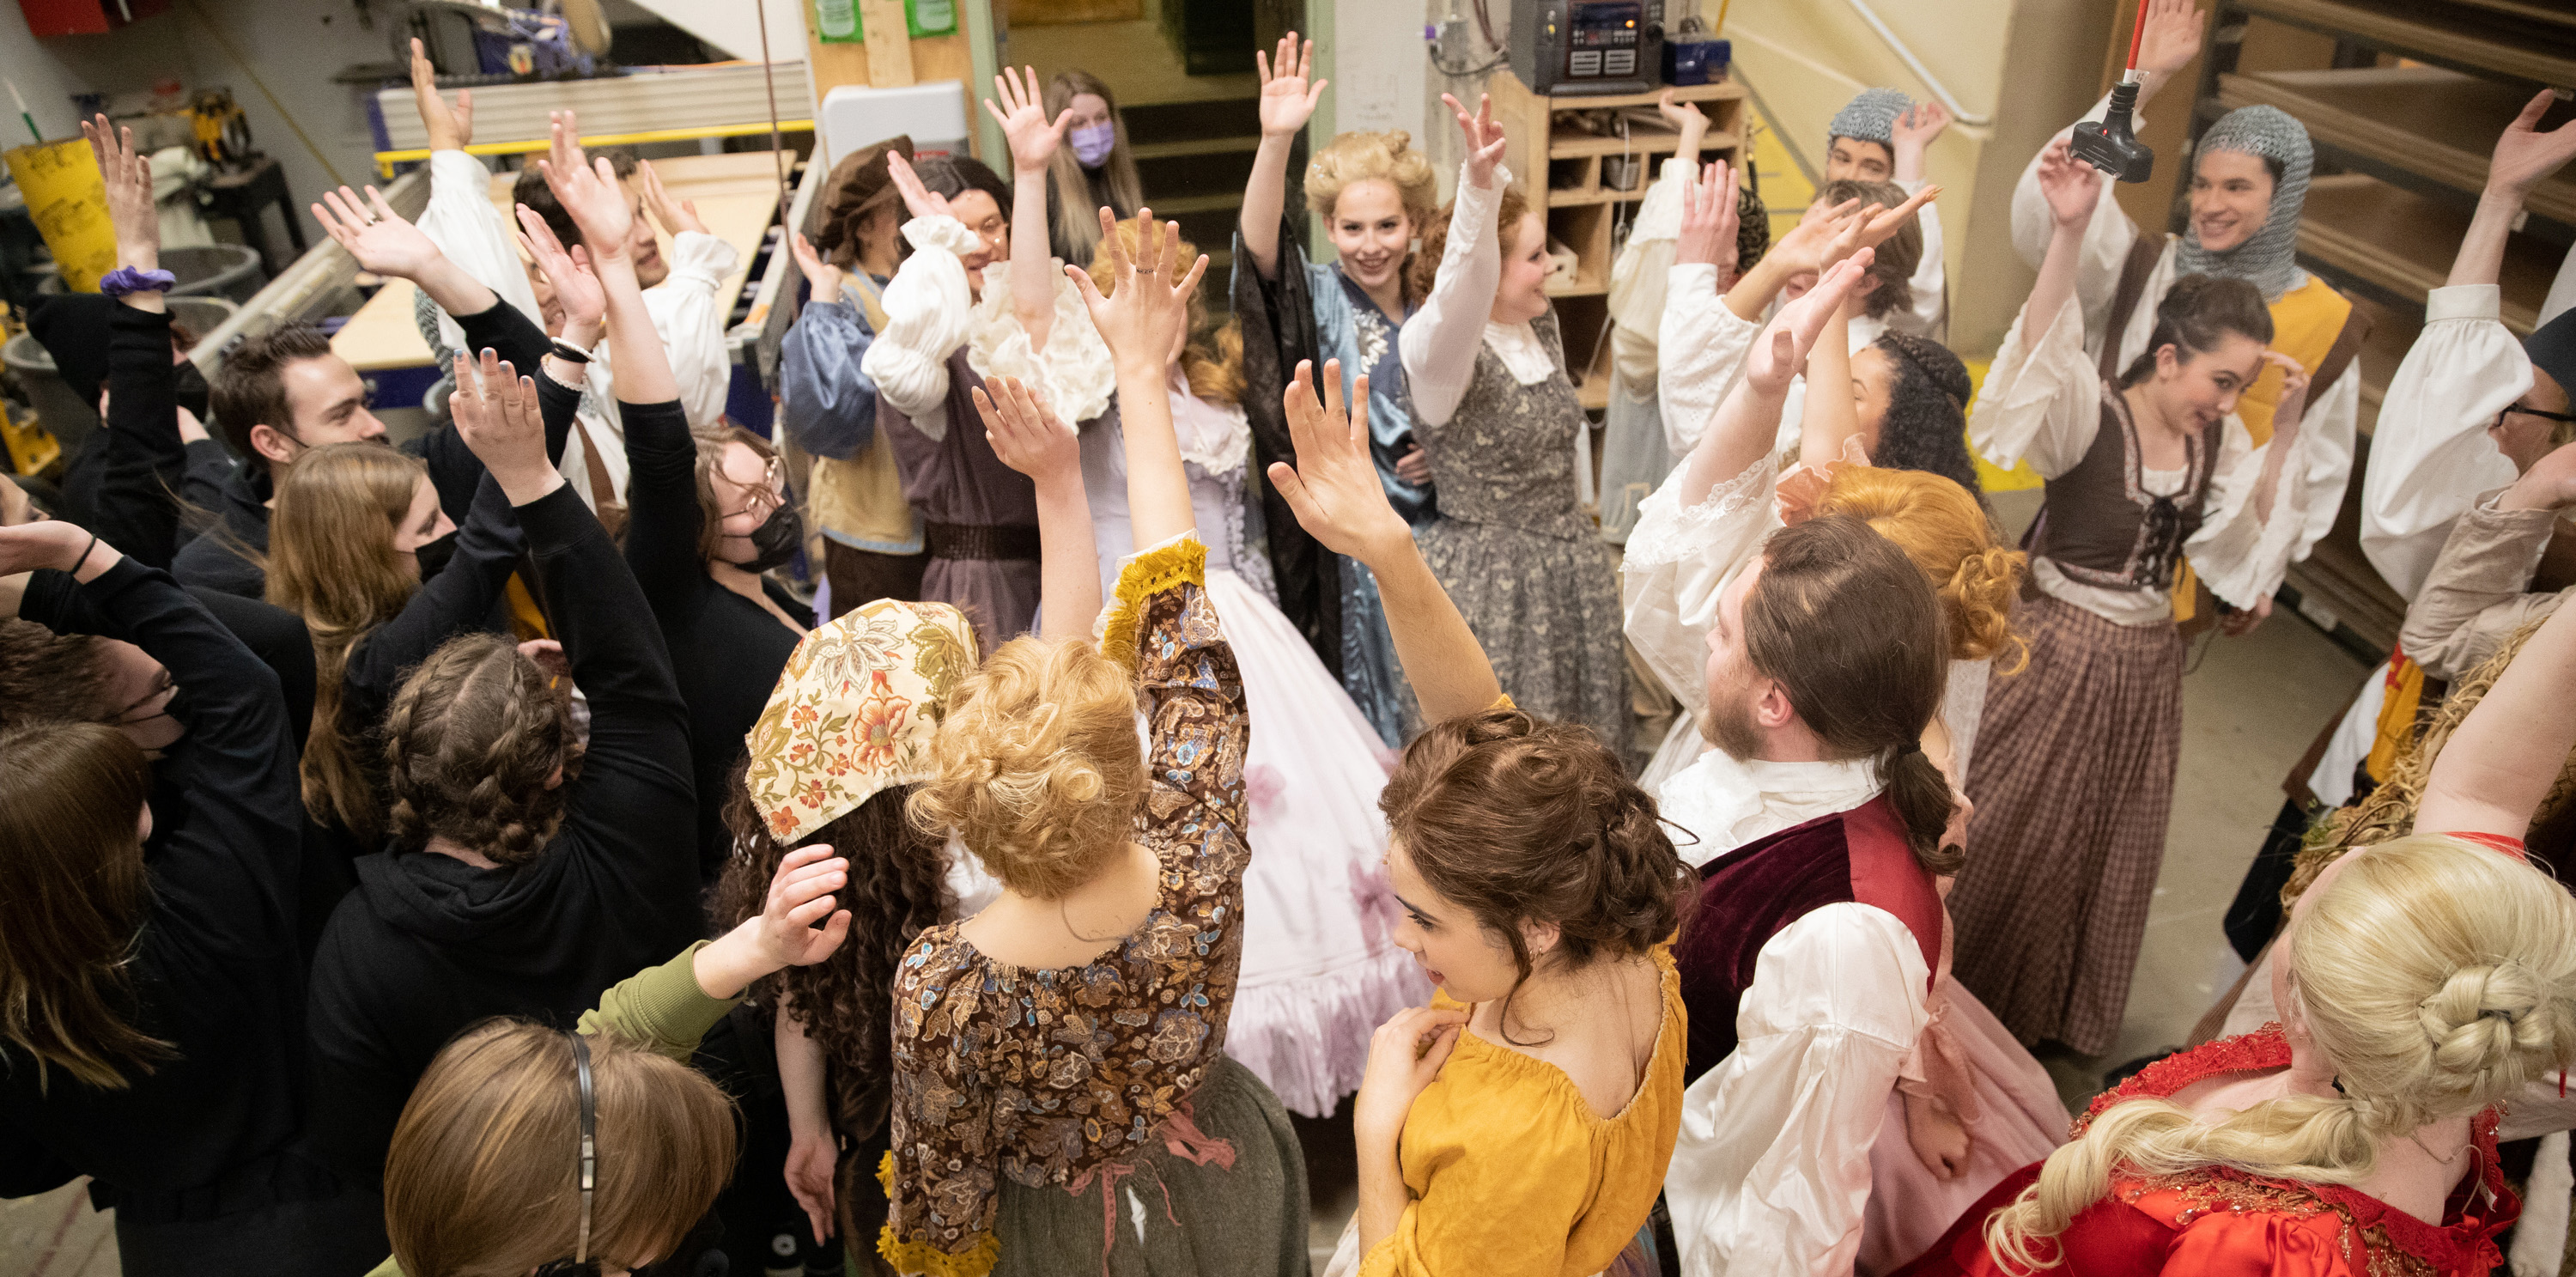 Students in the production of Cinderella raising their hands after a huddle